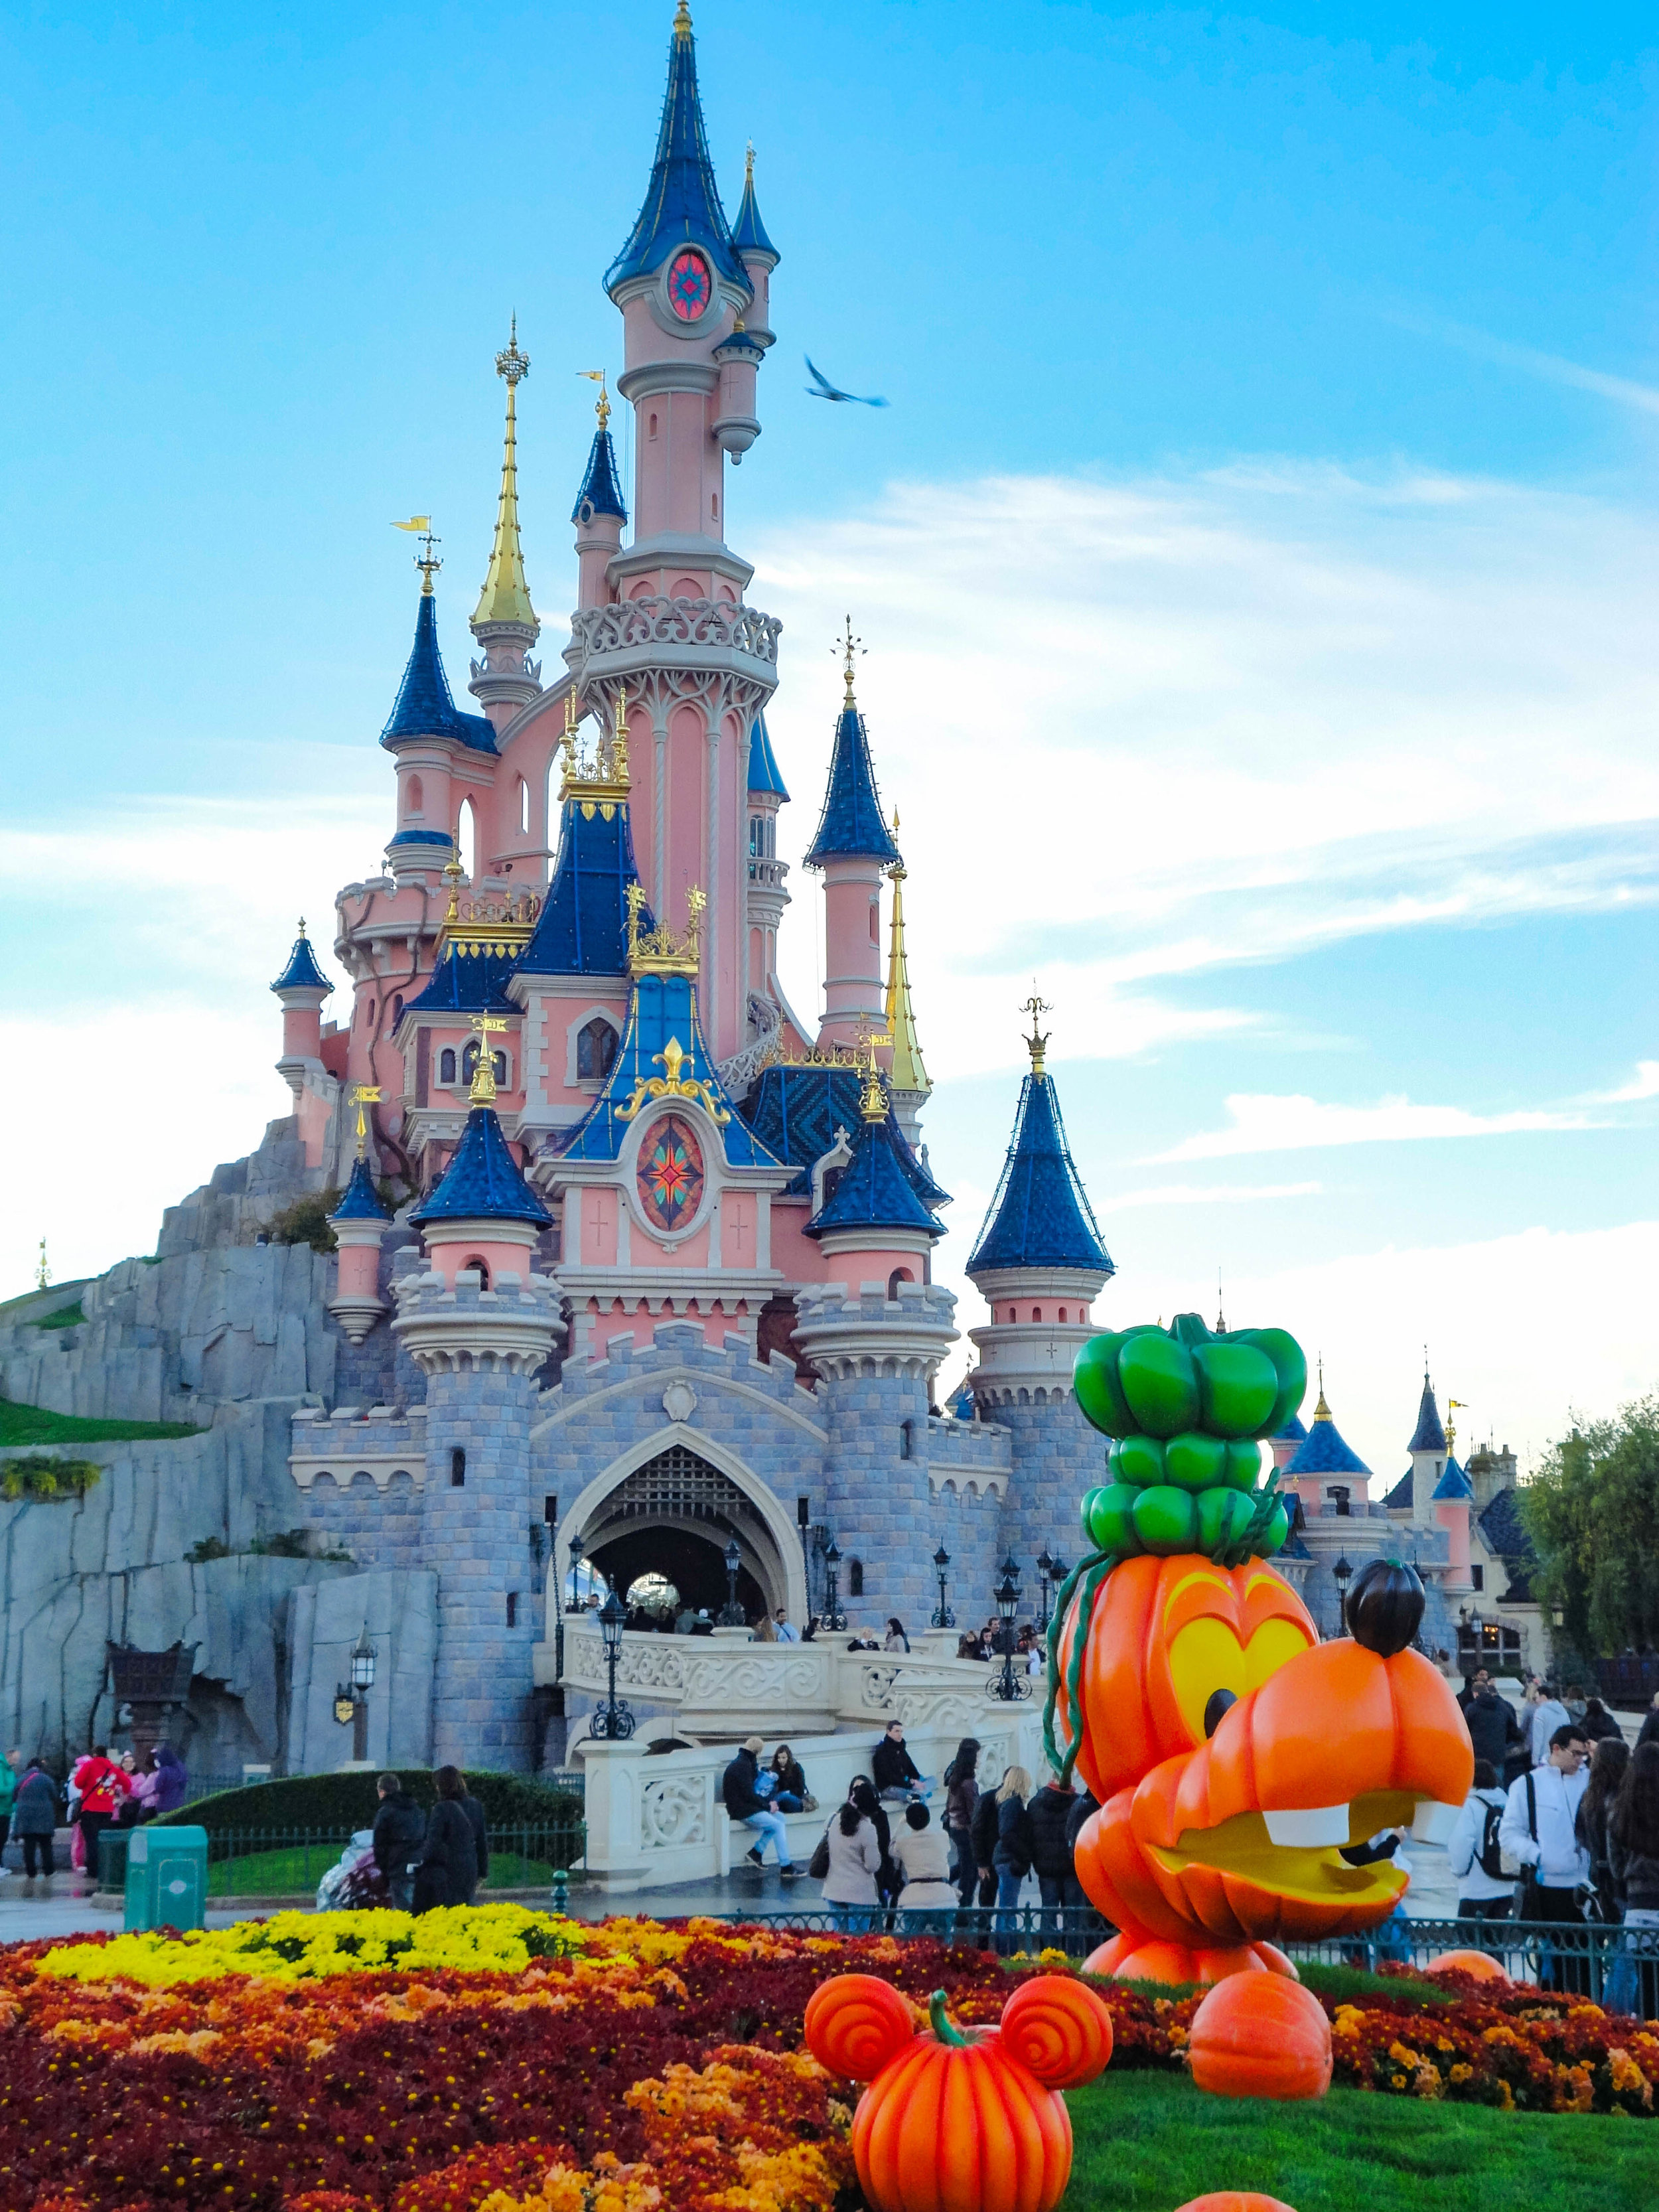 DISNEYLAND PARIS GUIDE - Things you MUST see! — The Sweetest Escapes